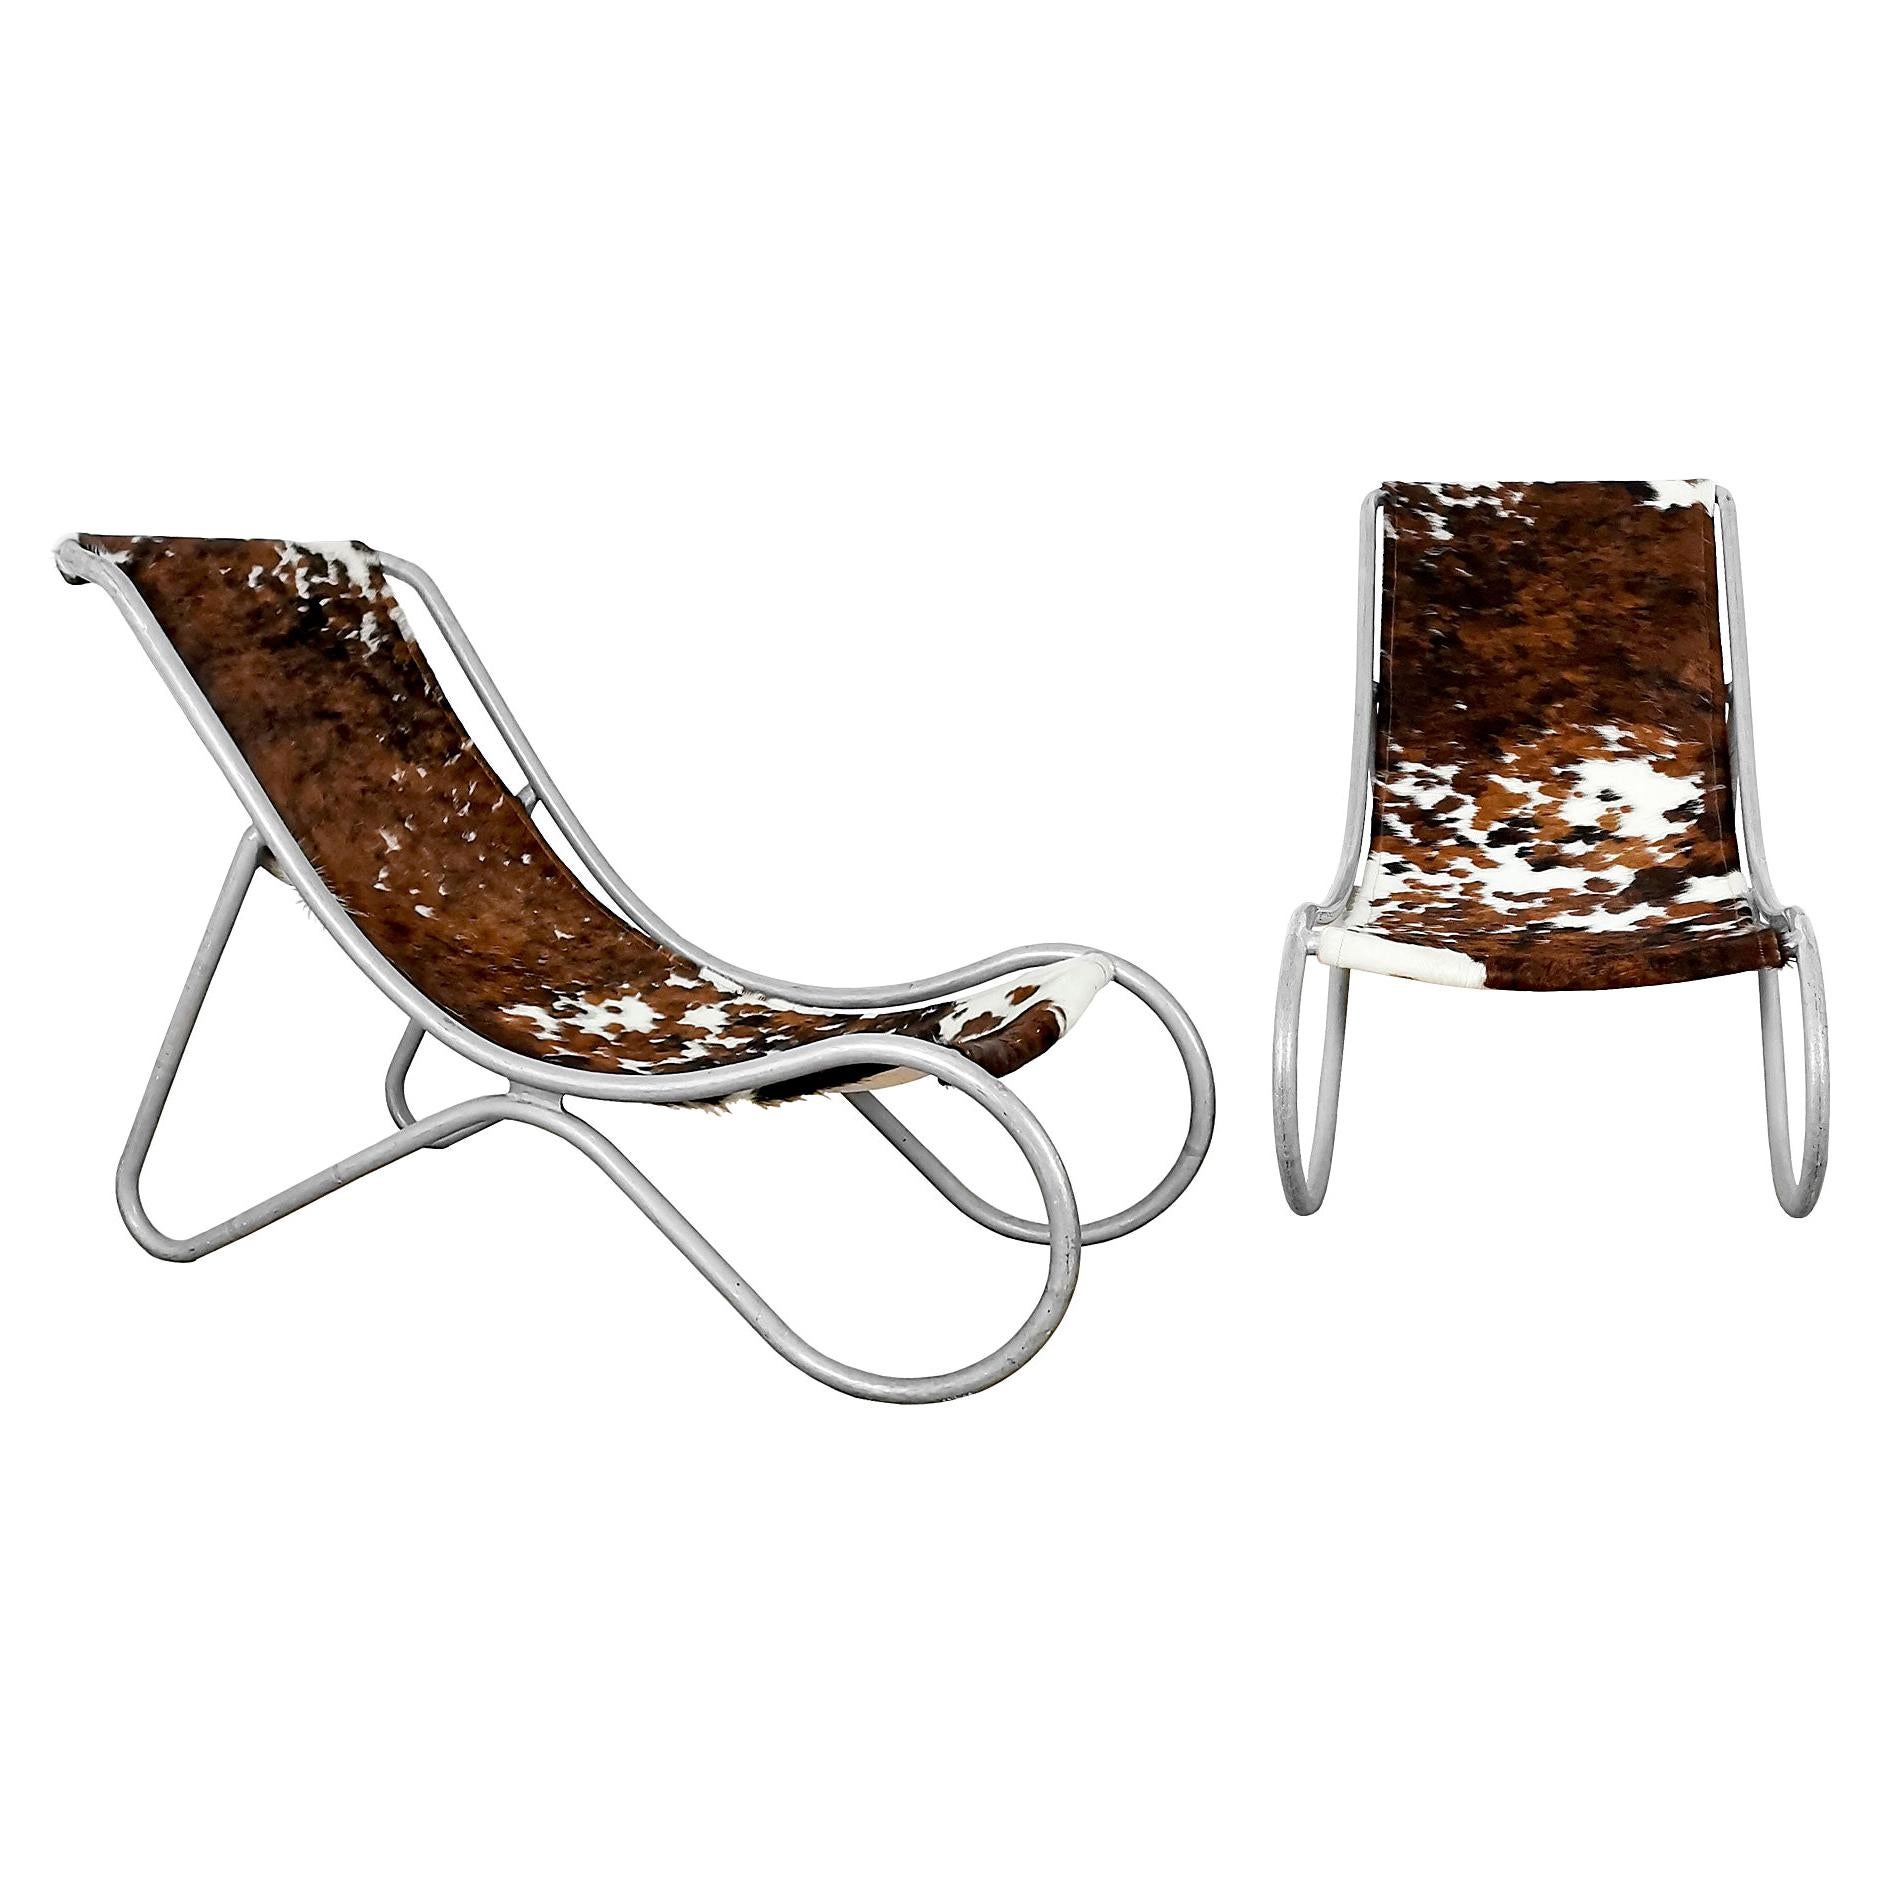 1930´S Pair of Art Deco Deck Chairs in Aluminum and Leather - Italy